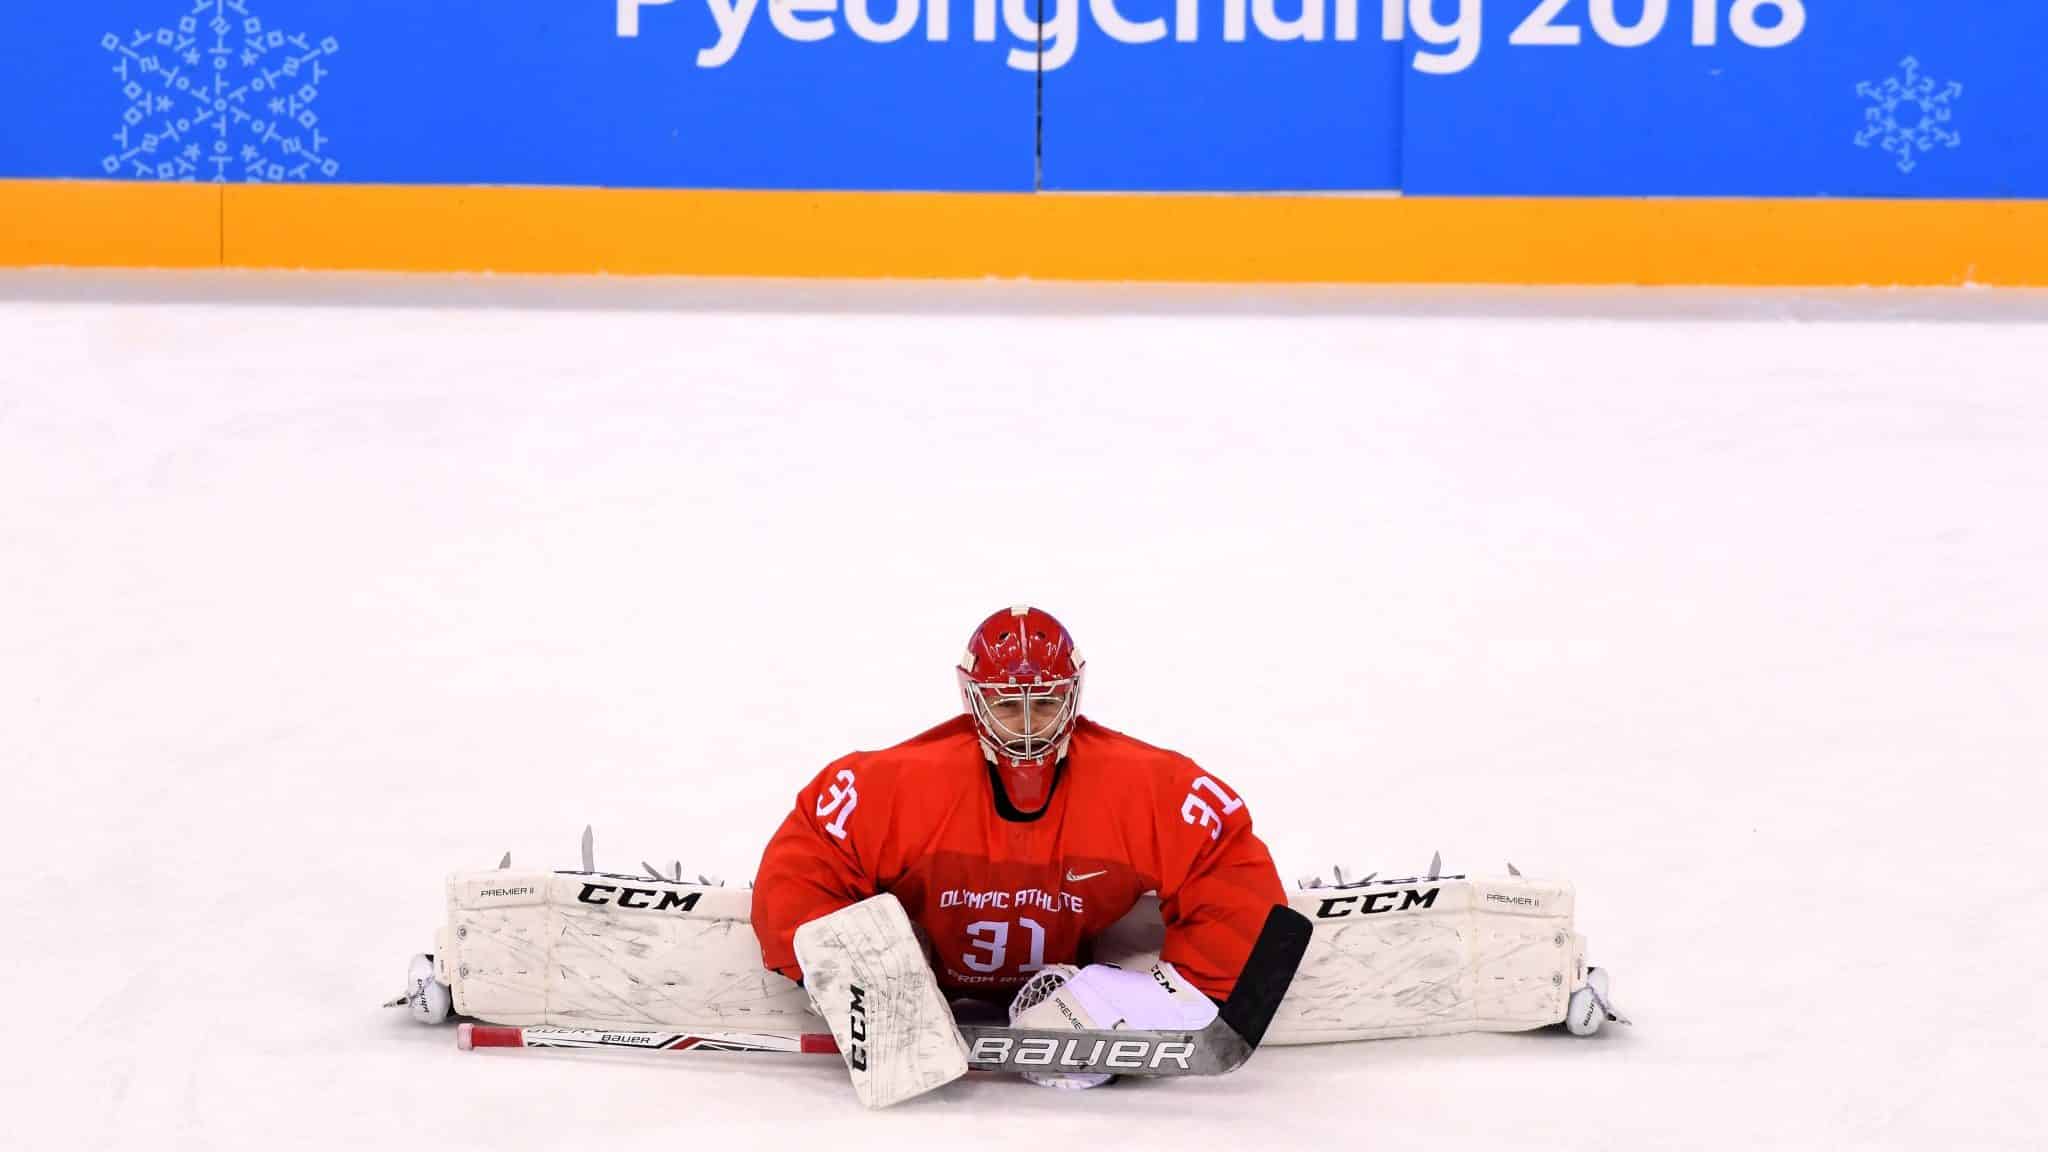 GANGNEUNG, SOUTH KOREA - FEBRUARY 25: Ilya Sorokin #31 of Olympic Athlete from Russia warms up before the Men's Ice Hockey Gold Medal Game against Germany on day sixteen of the PyeongChang 2018 Winter Olympic Games at Gangneung Hockey Centre on February 25, 2018 in Gangneung, South Korea.